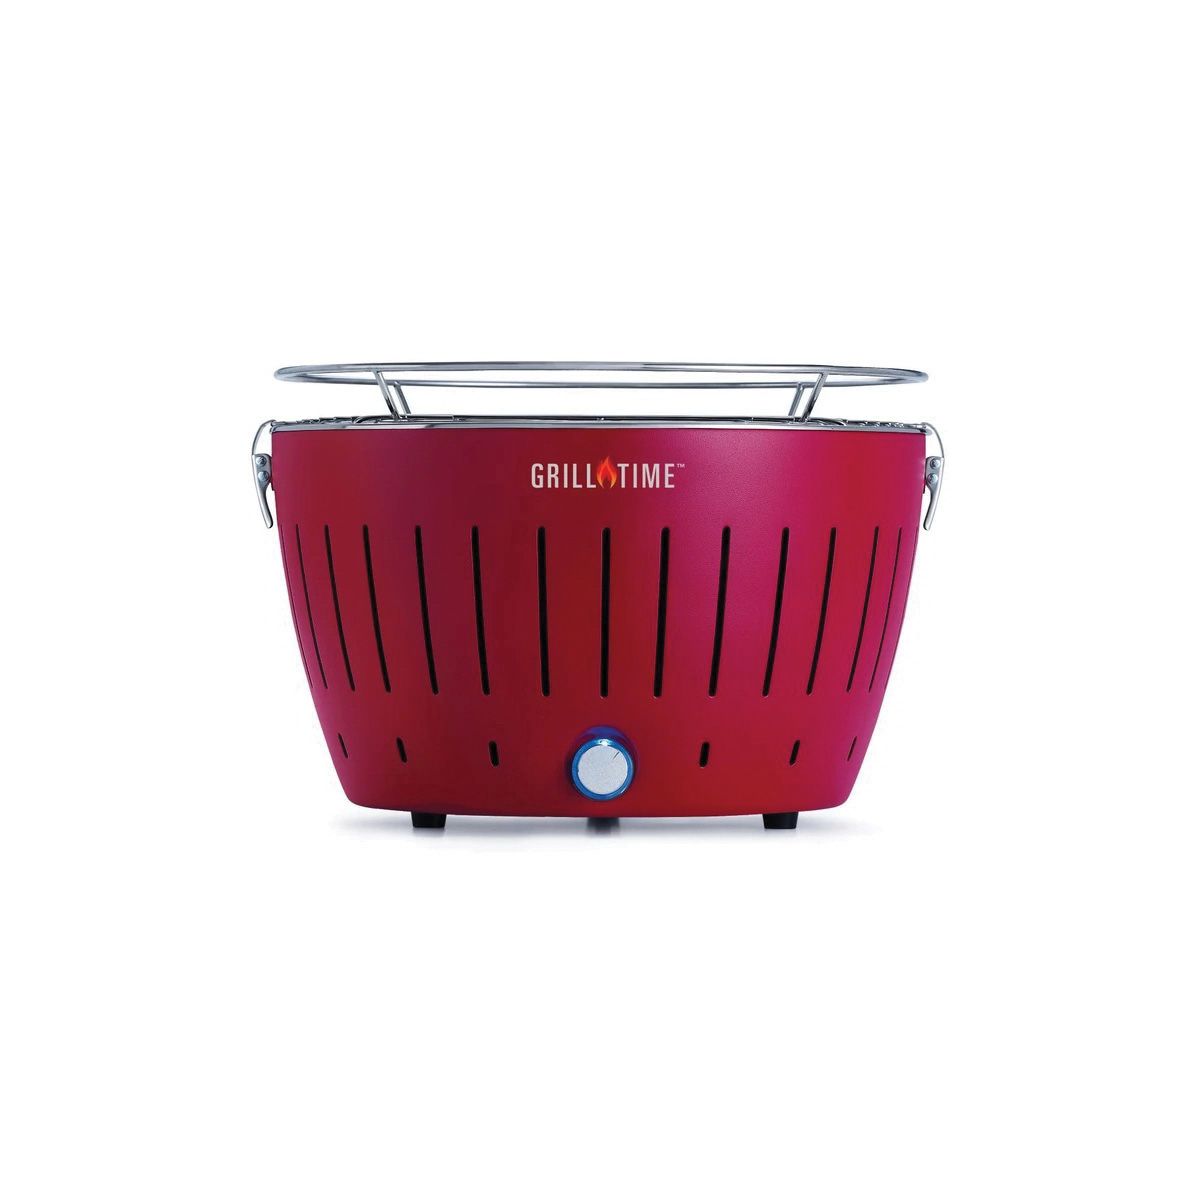 TAILGATER GT UPG-R-13 Charcoal Grill, Blazing Red, Steel Body